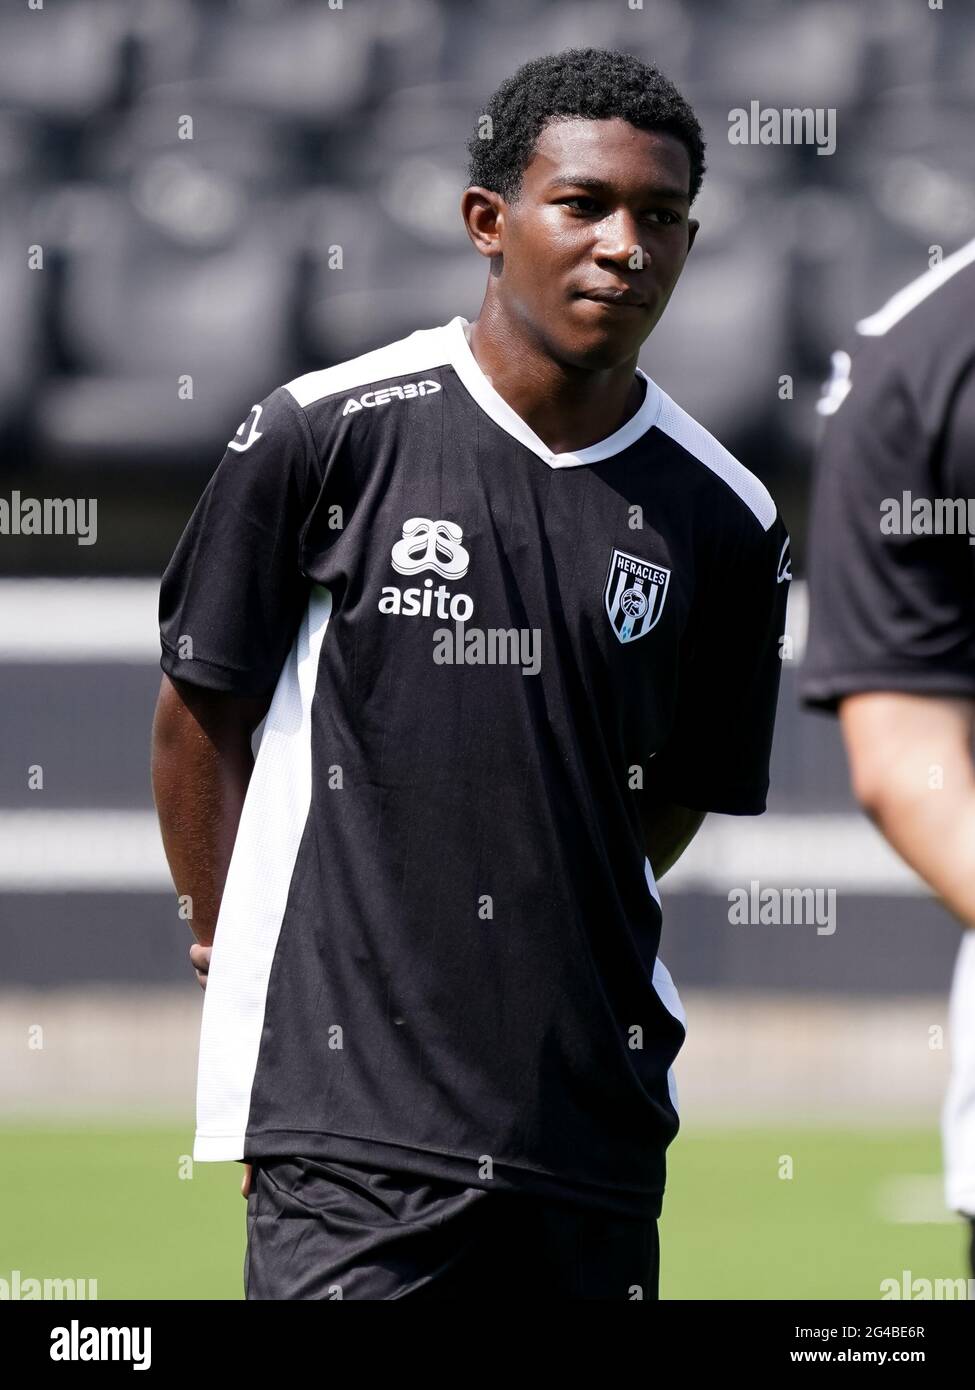 ALMELO, NETHERLANDS - JUNE 20: Devonish Eustacia of Heracles Almelo during the first Training Session of Heracles Almelo of season 2021-2022 at the Erve Asito on June 20, 2021 in Almelo, Netherlands. (Photo by Rene Nijhuis/Orange Pictures) Stock Photo